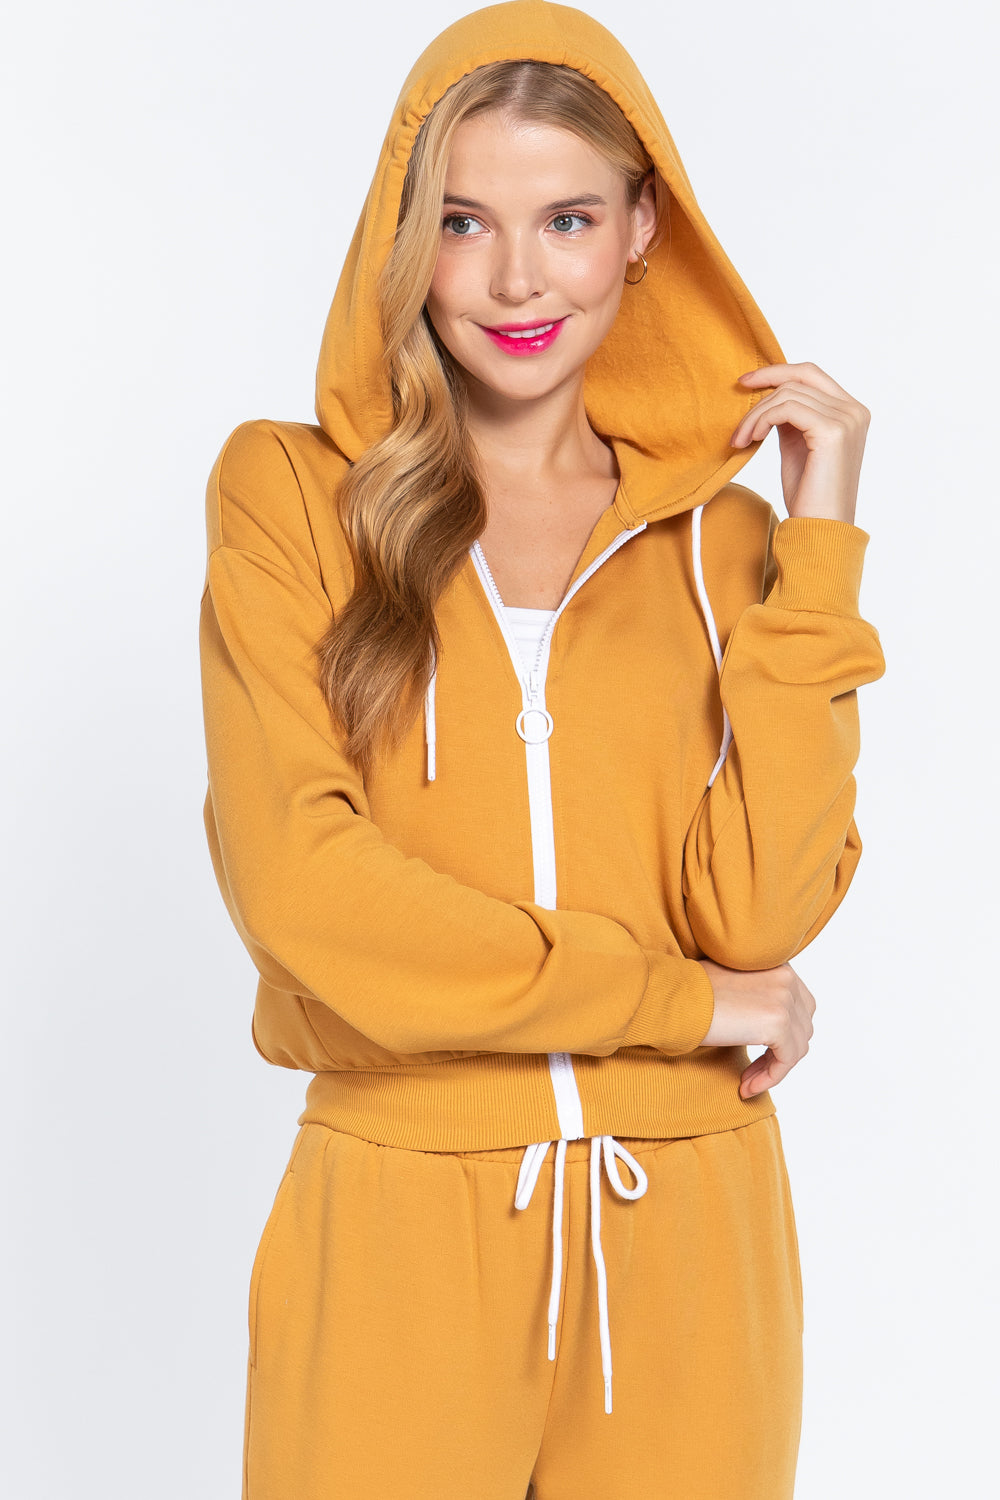 Fleece French Terry Jacket - Camel Yellow / S Apparel & Accessories Wynter 4 All Seasons